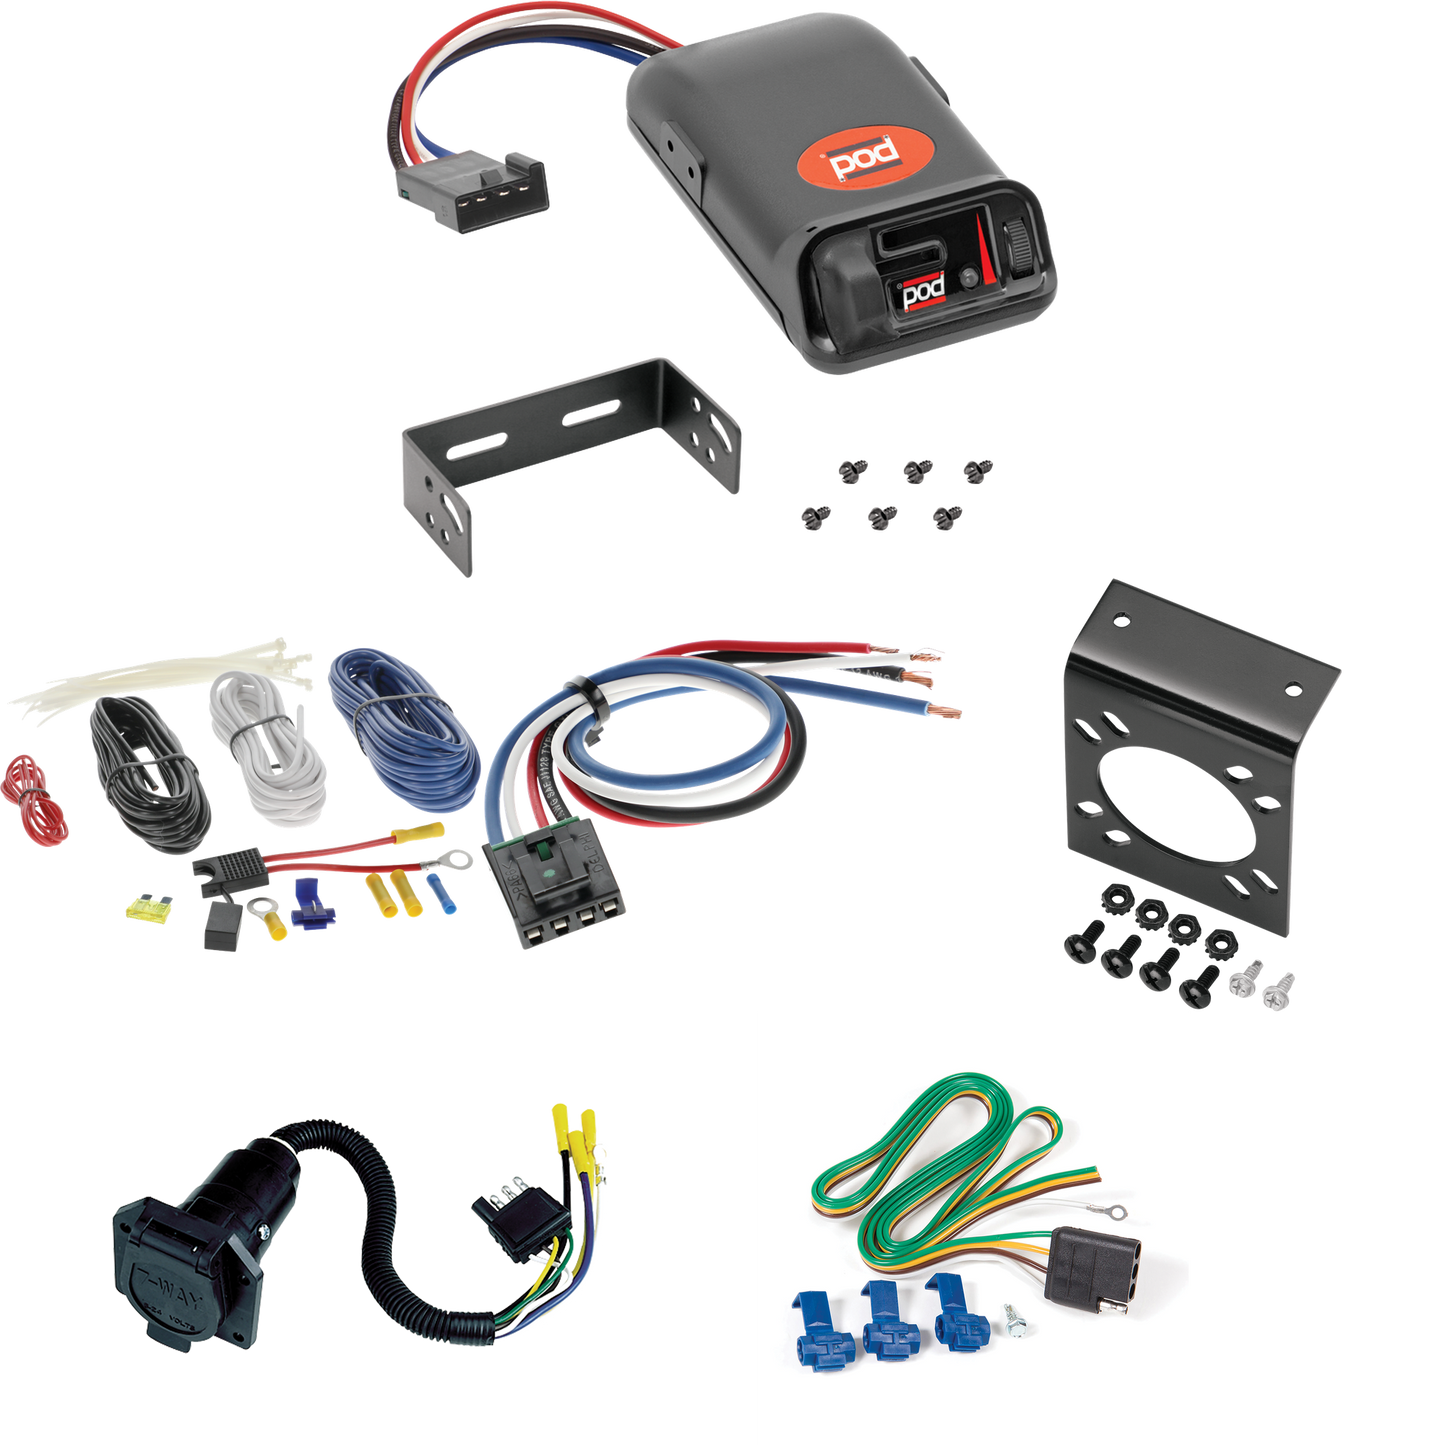 Fits 1980-1983 Lincoln Mark VI 7-Way RV Wiring + Pro Series POD Brake Control + Generic BC Wiring Adapter By Reese Towpower